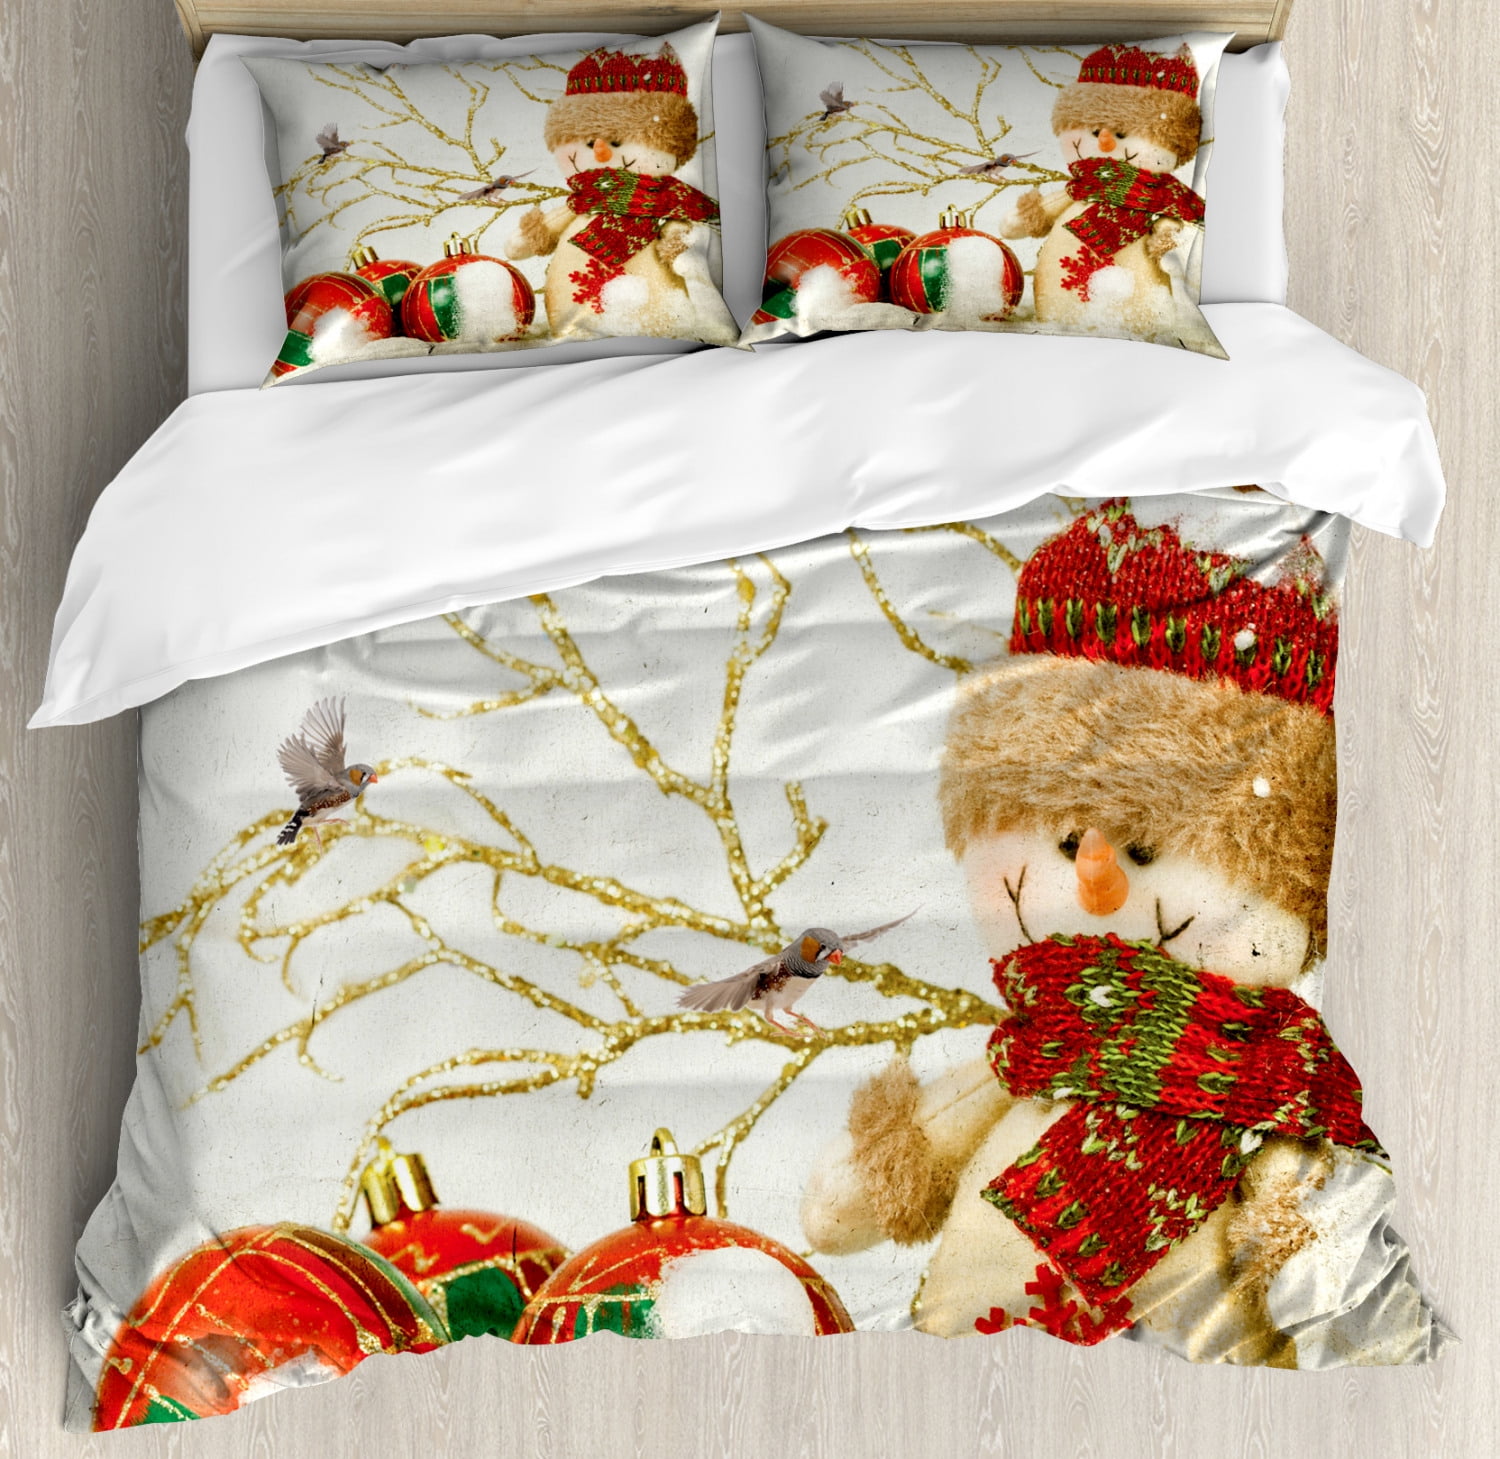 Spanish Duvet Cover Set Queen Size, Christmas Elements and Celebration  Theme Feliz Navidad Message in Spanish Language, Decorative 3 Piece Bedding  Set with 2 Pillow Shams, Multicolor, by Ambesonne 